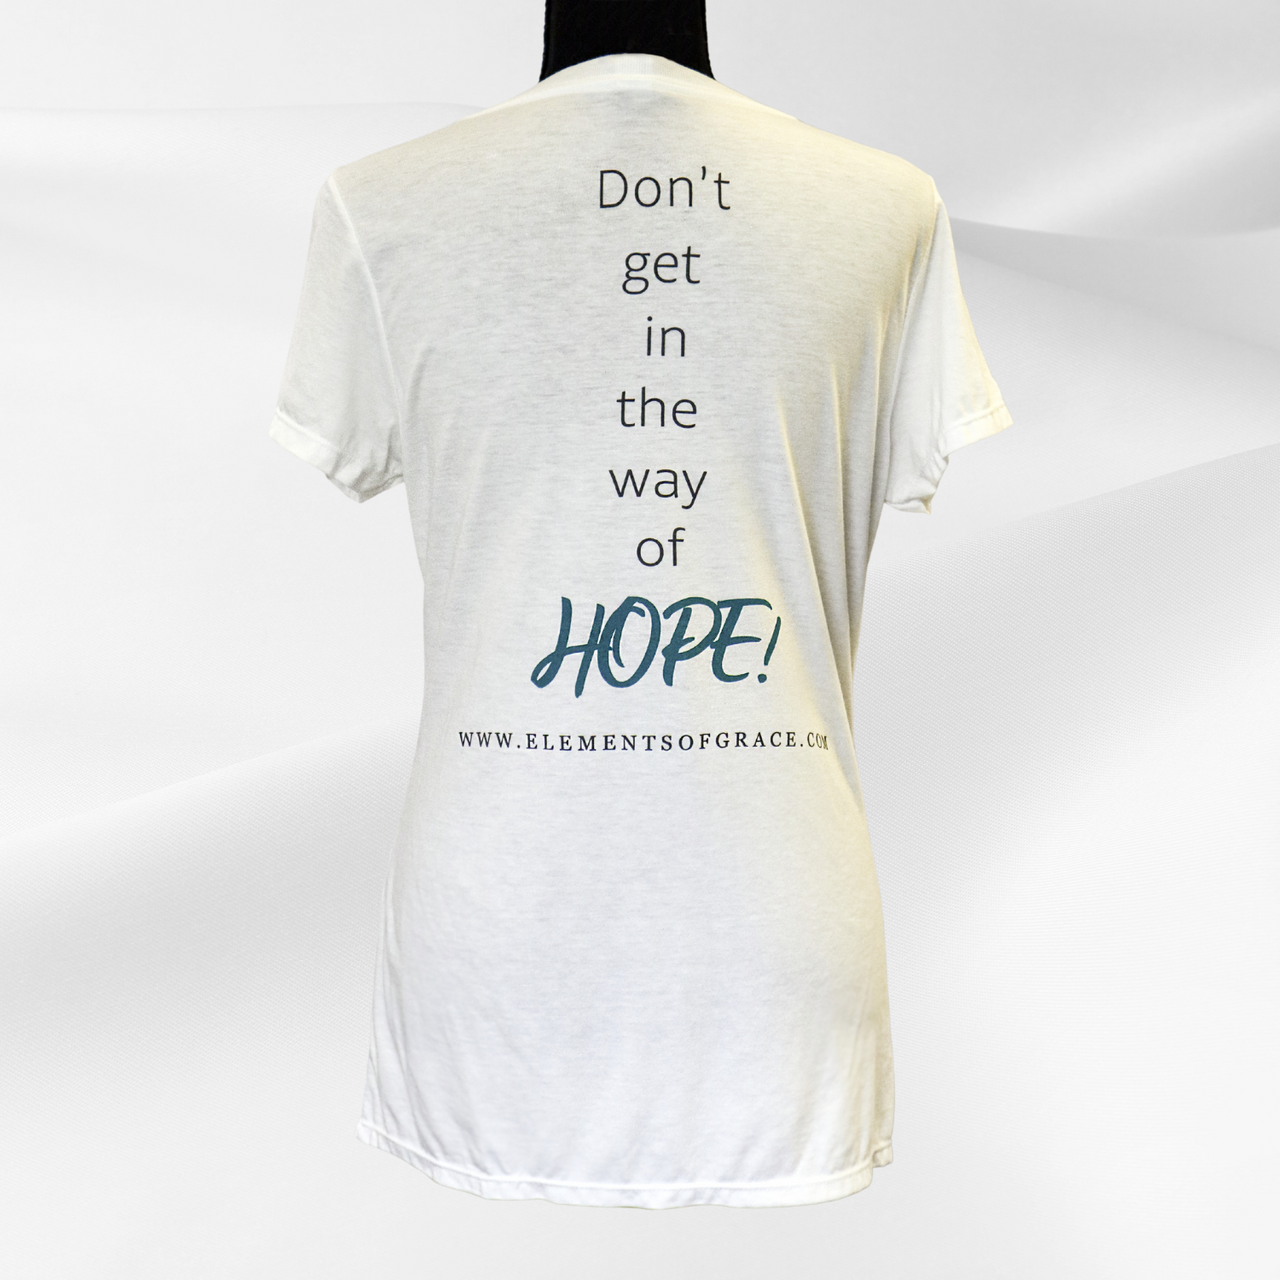 Don't Get in the Way of HOPE!™ Ladies' V-Neck T-Shirt by Elements of Grace